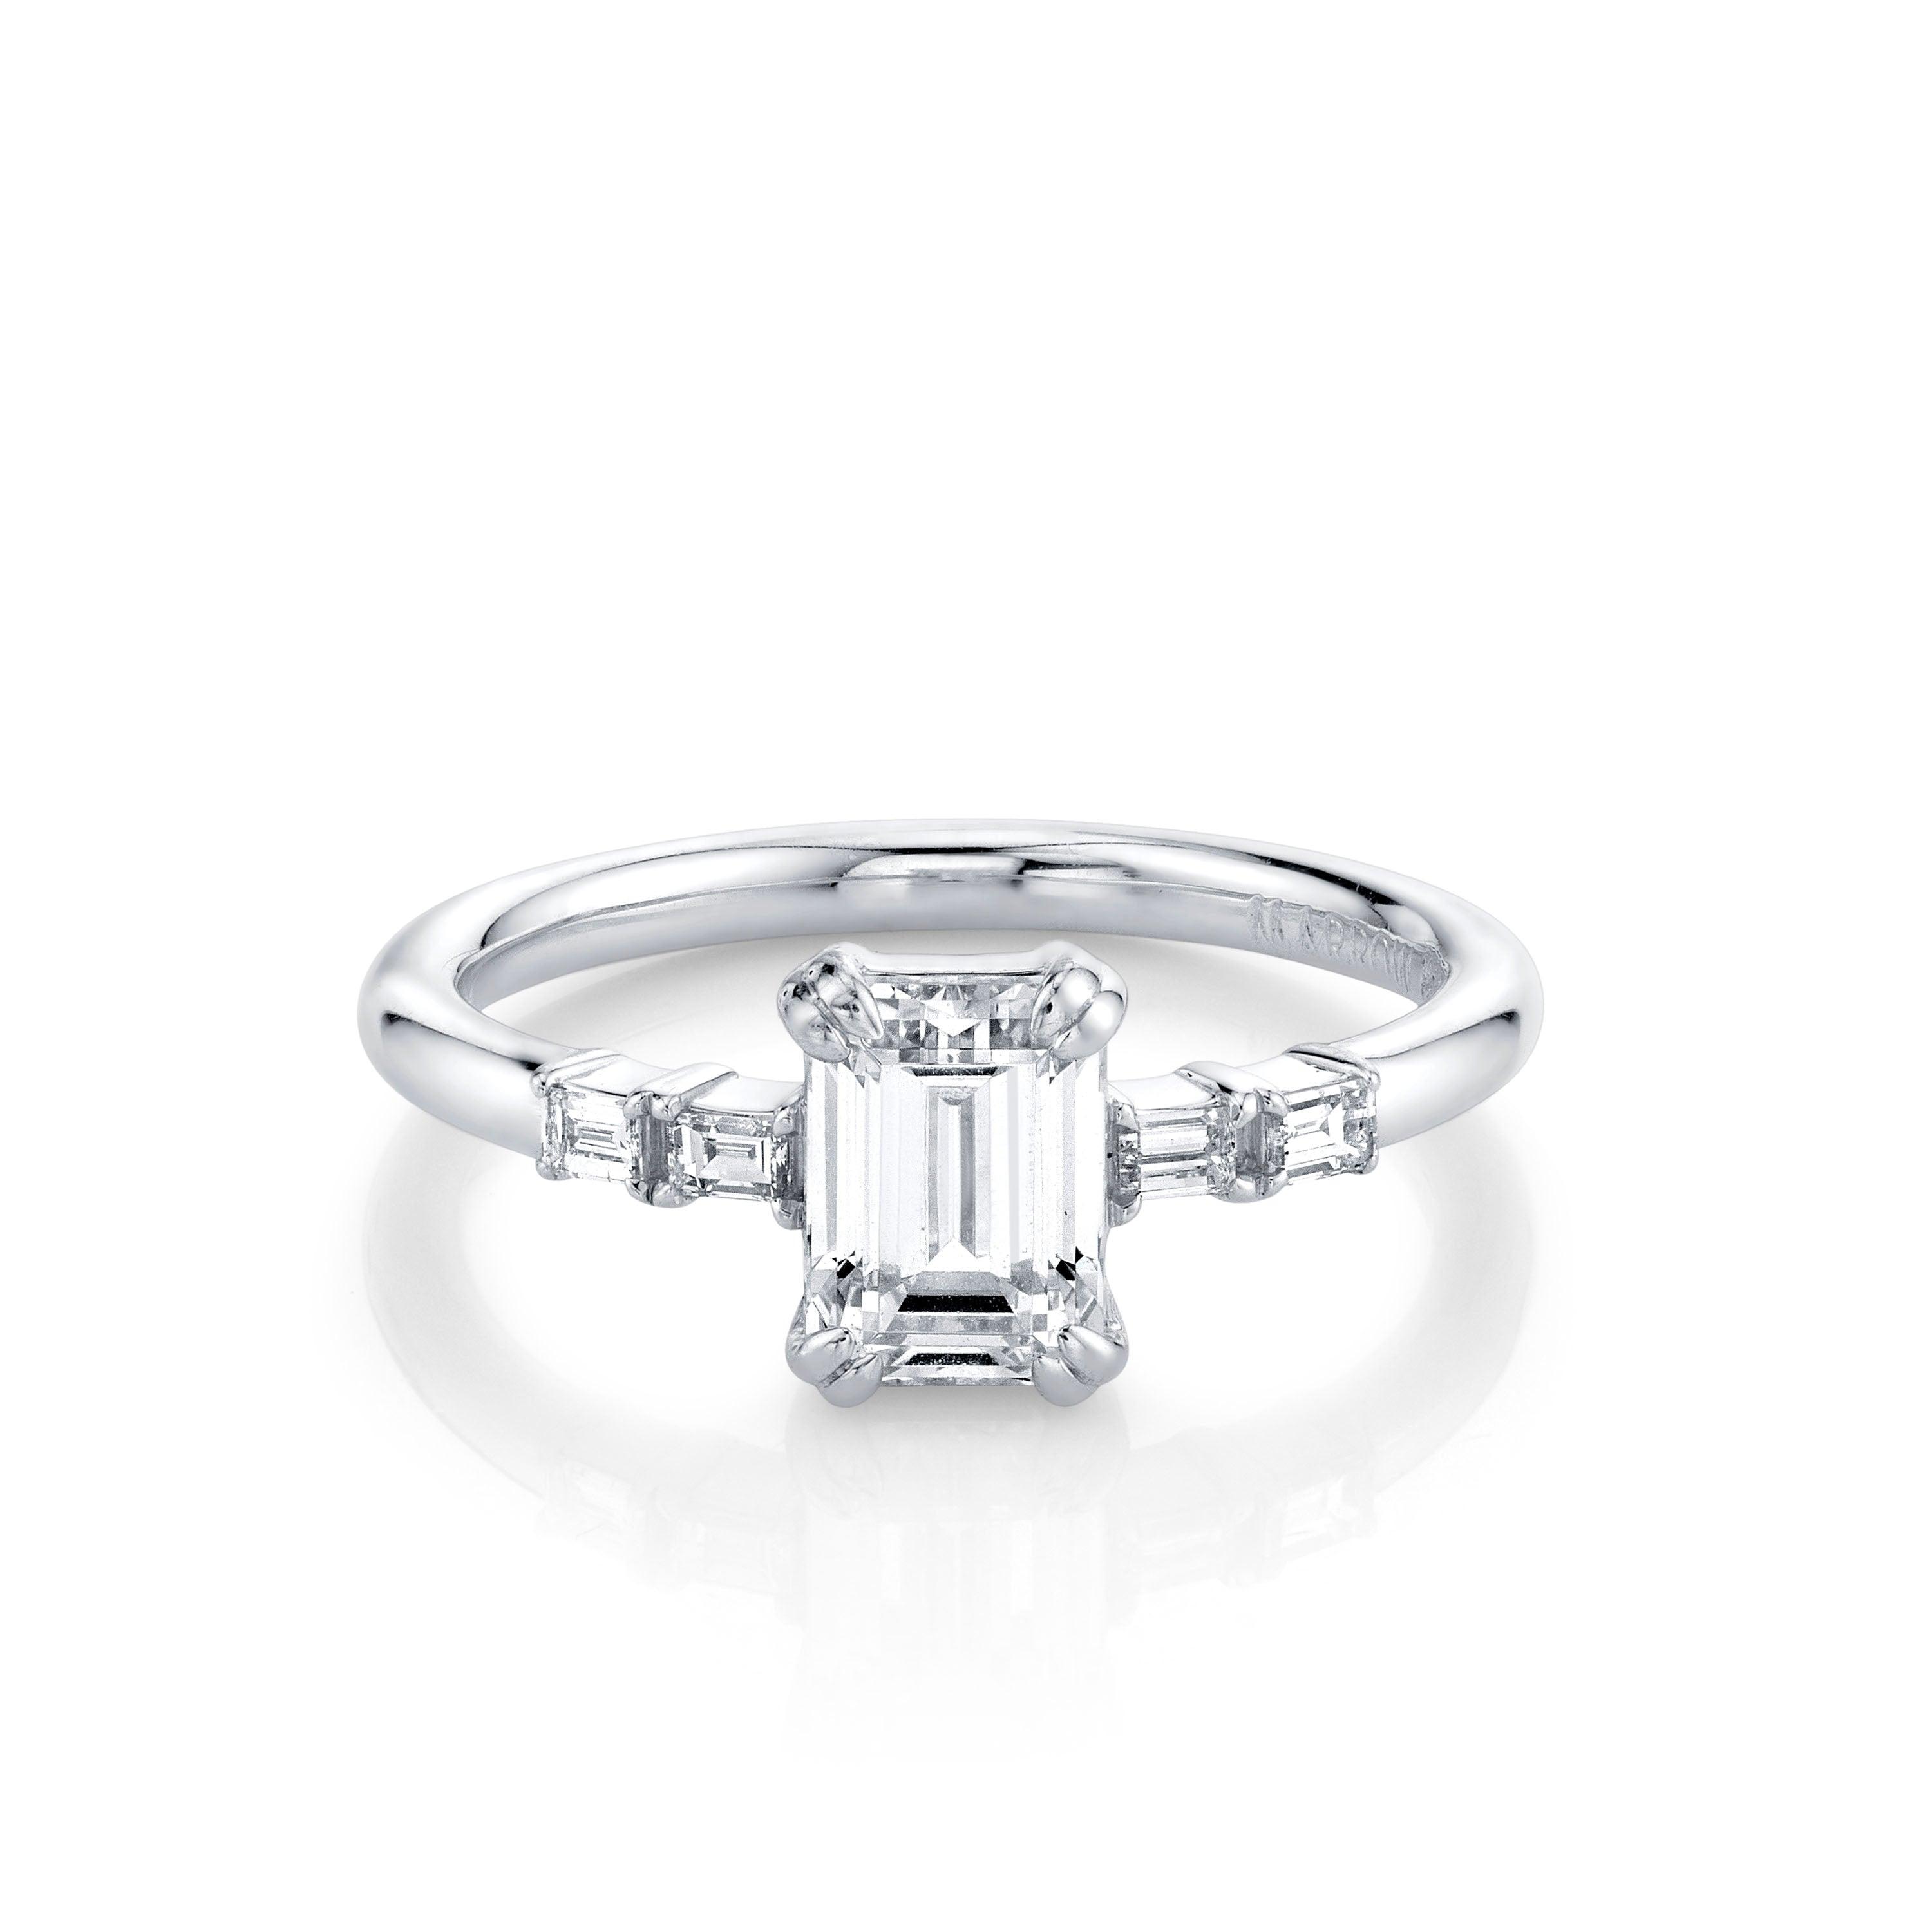 Marrow Fine Jewelry Emerald Cut White Diamond Engagement Ring With Baguette Side Diamonds